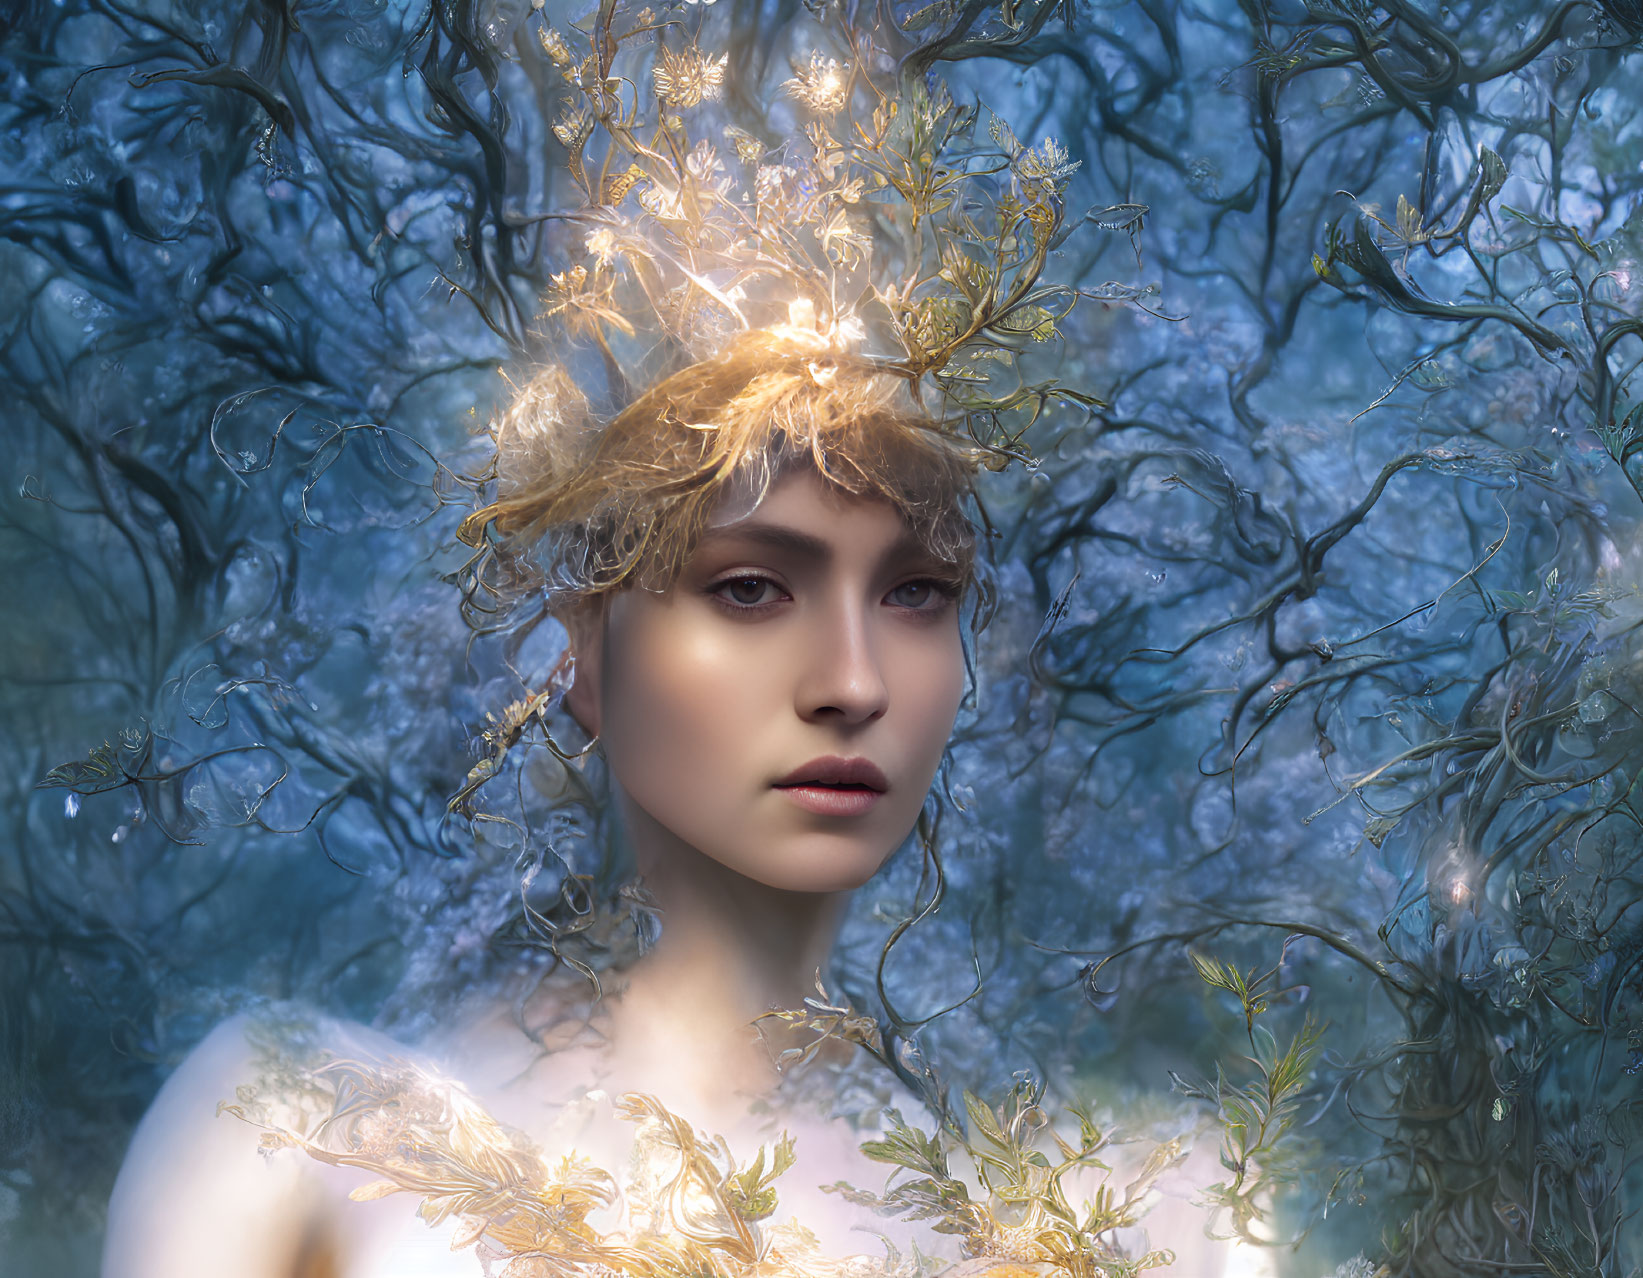 Surreal portrait of woman with mystical crown in glowing leaf attire, set in ethereal blue forest